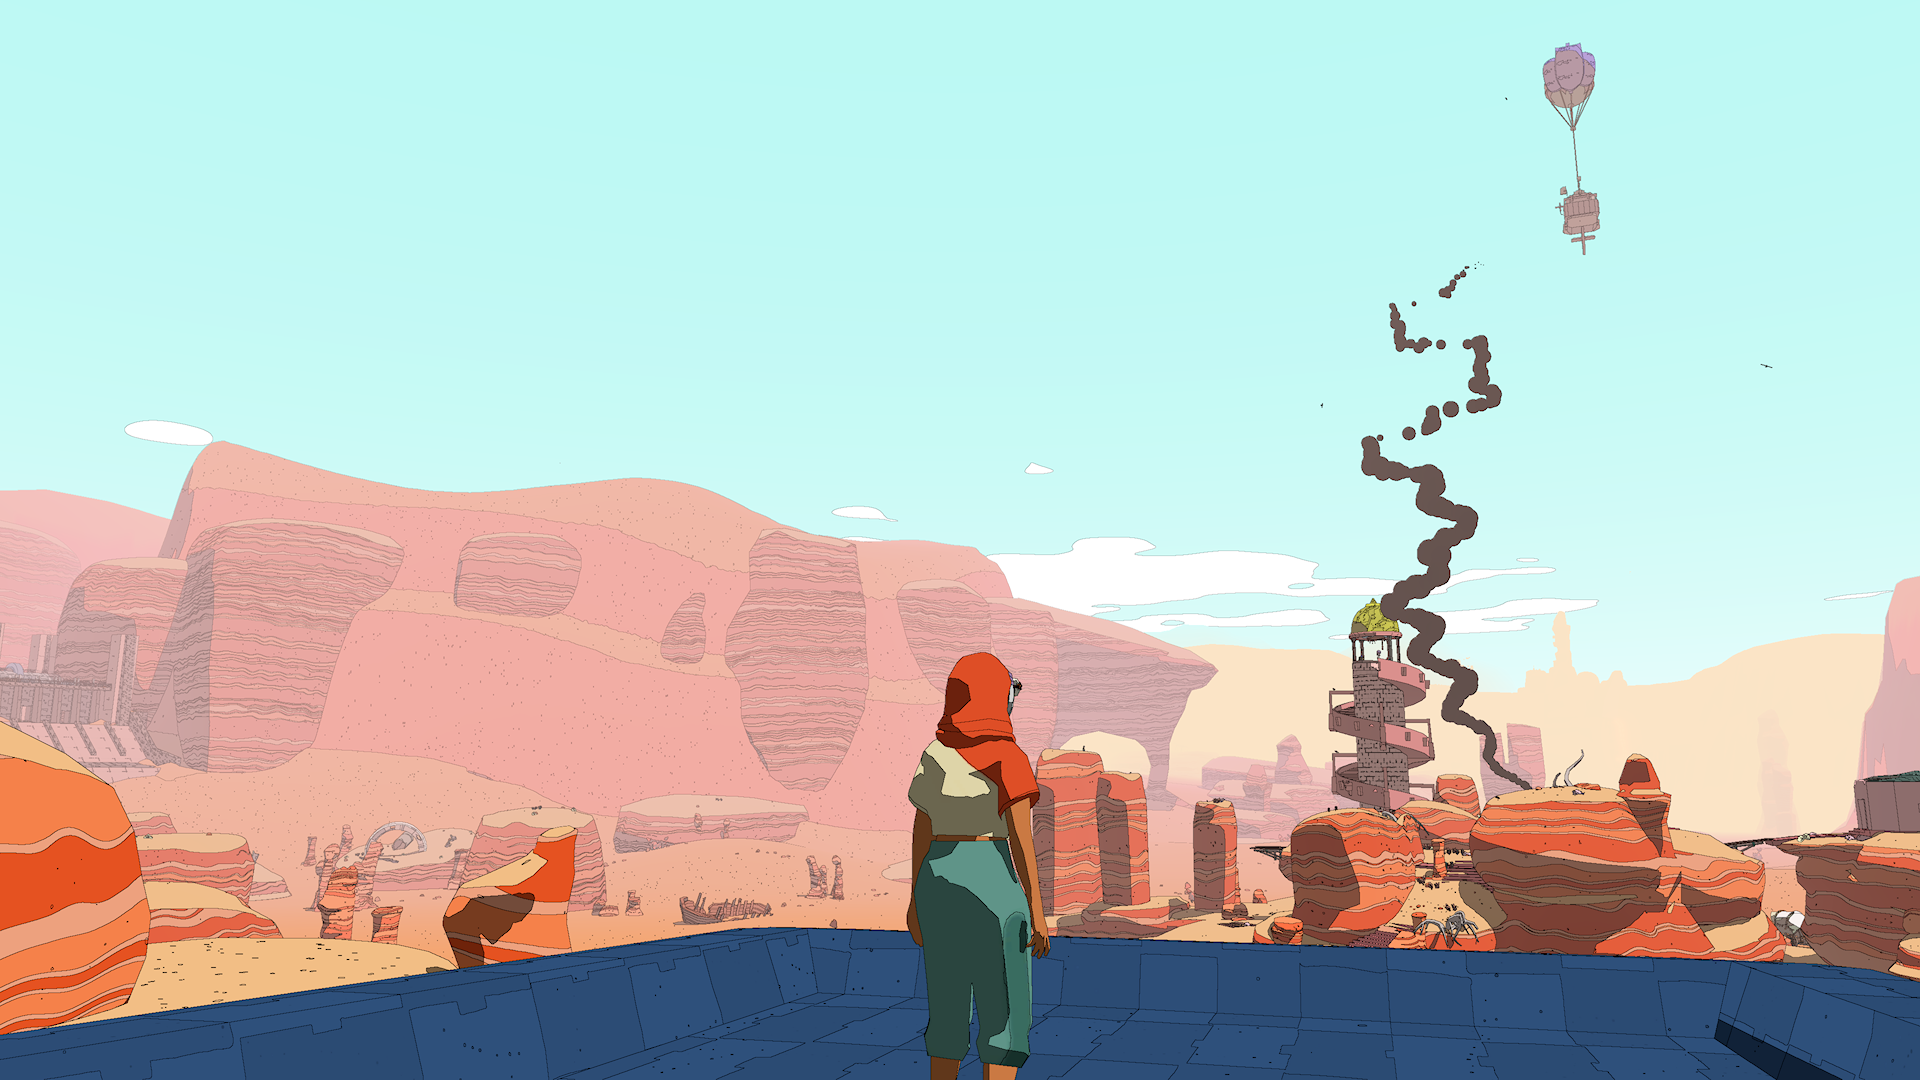 screenshot of Xbox game SABLE. the protagonist looks out over a rocky desert towards a small nomad camp